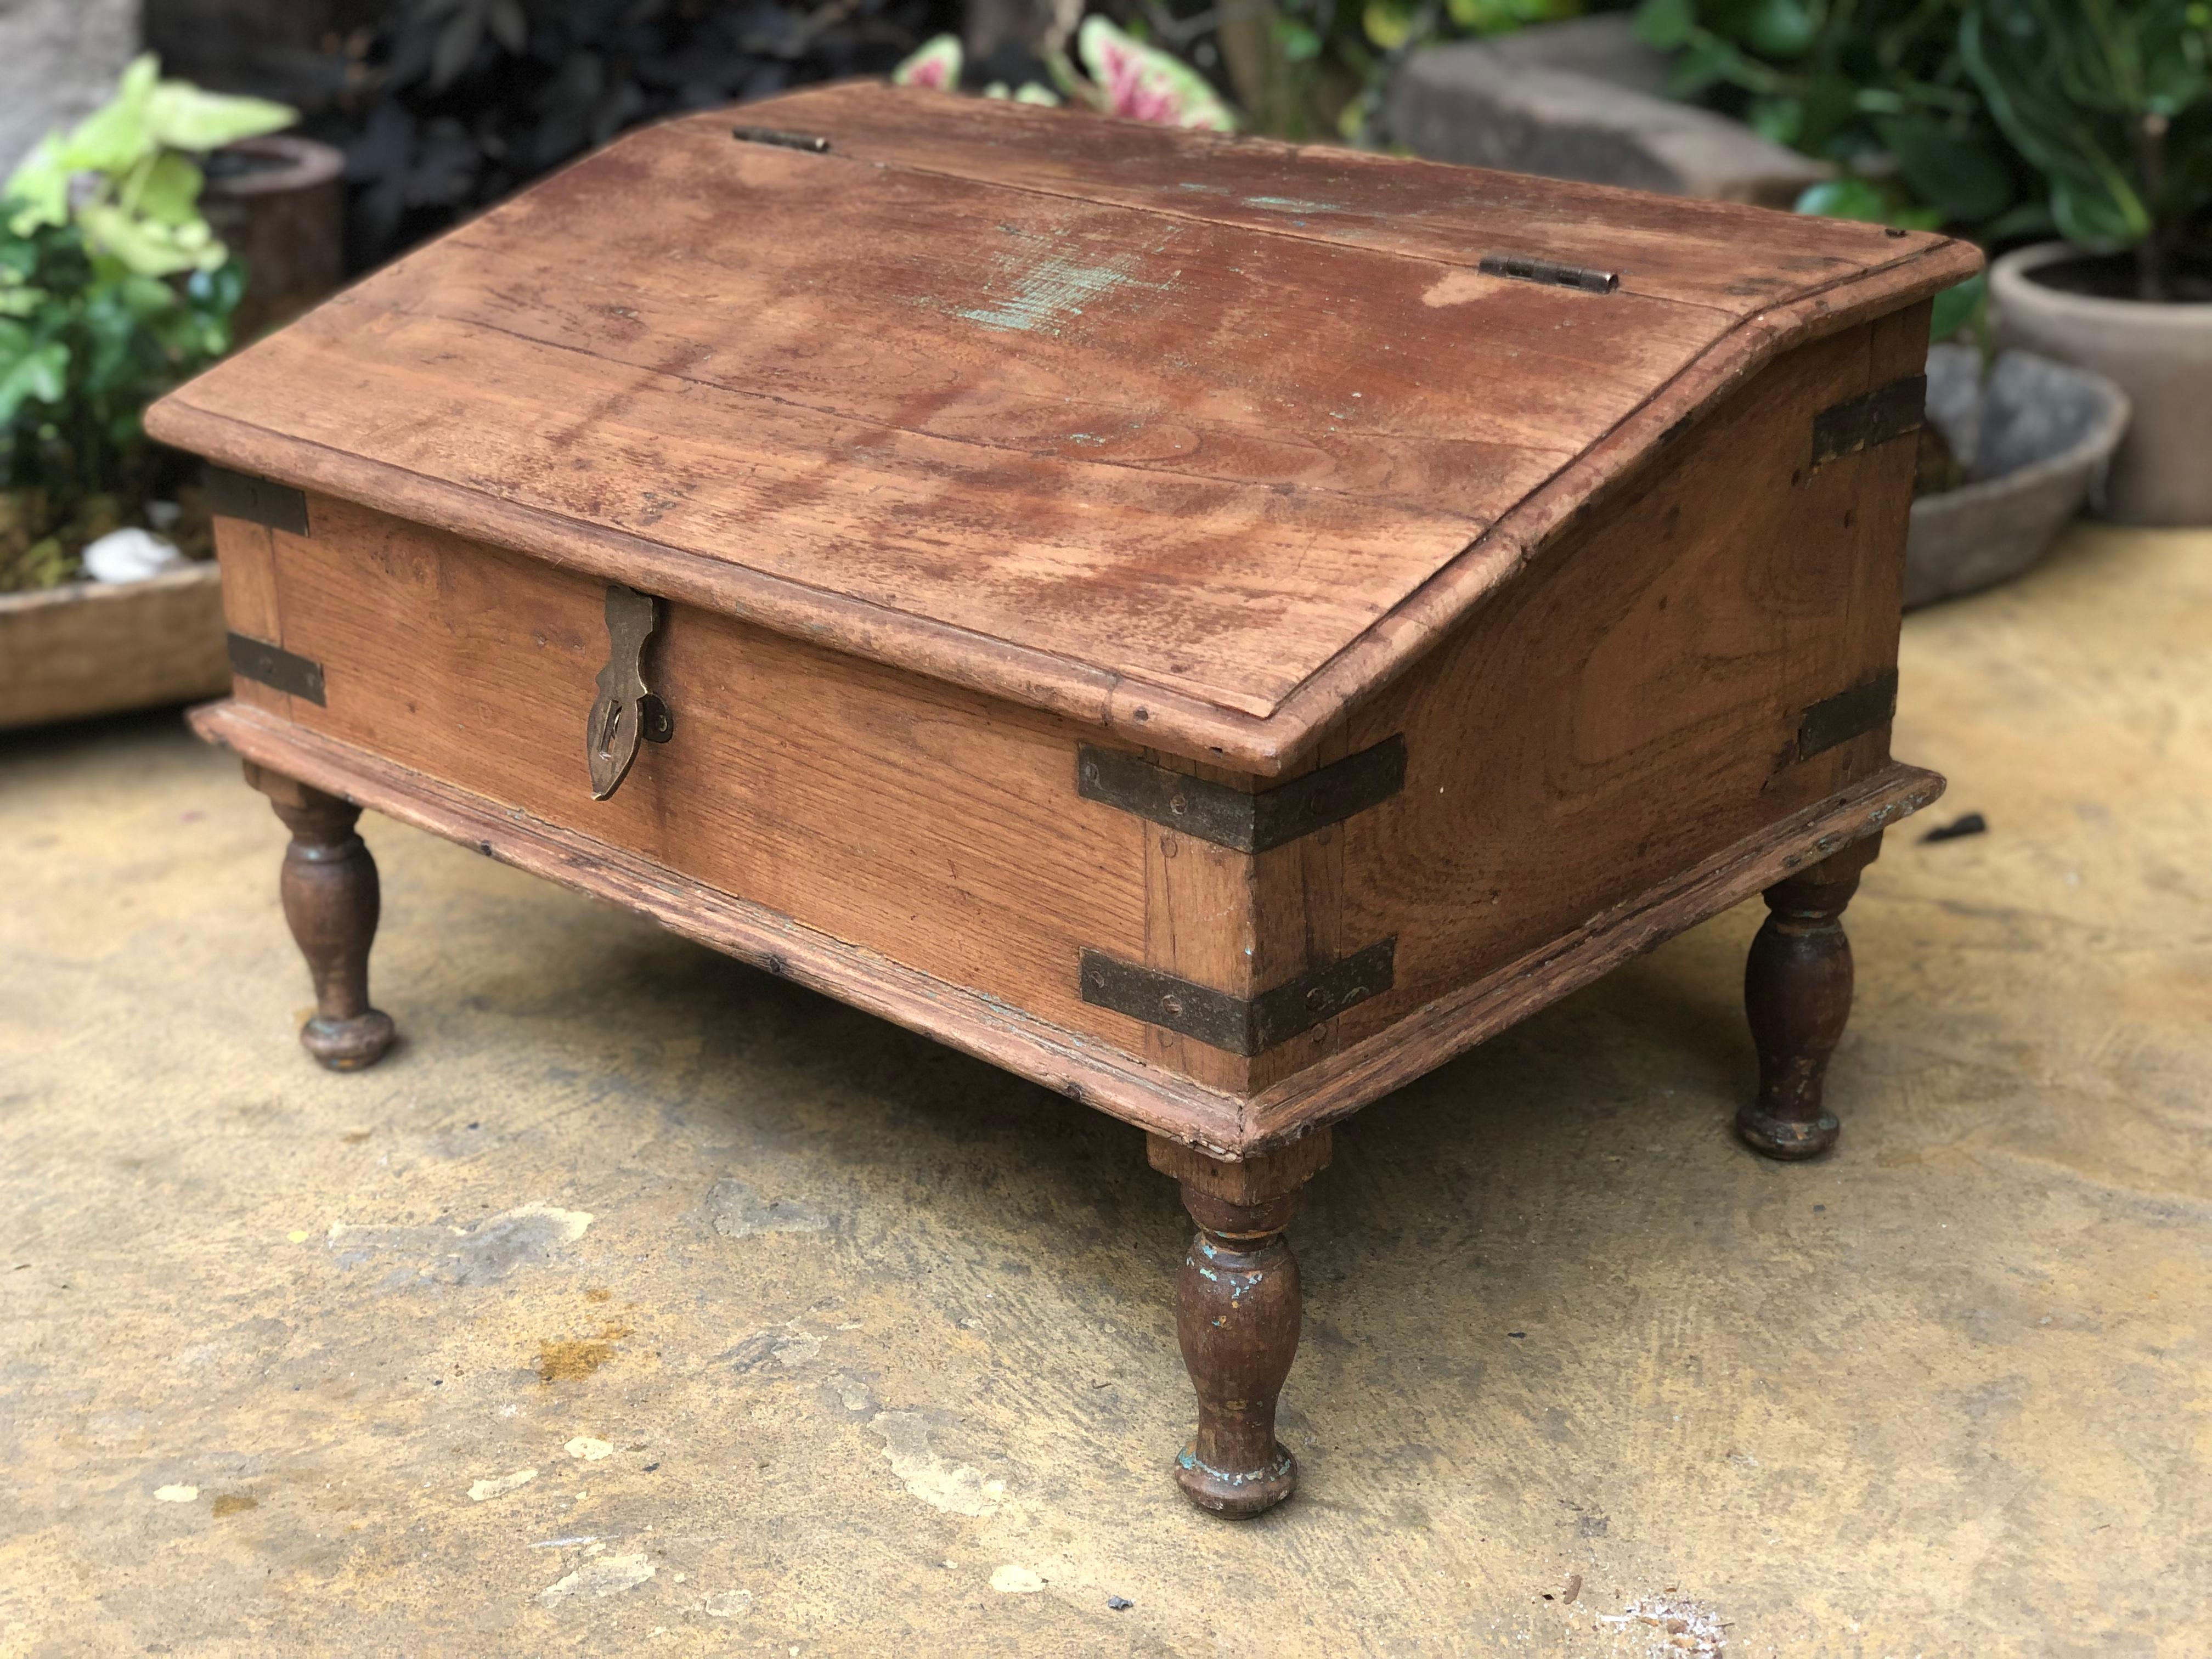 English country portable writing desk with lifting writing surface, it has its original bronze ironworks, late 18th century.